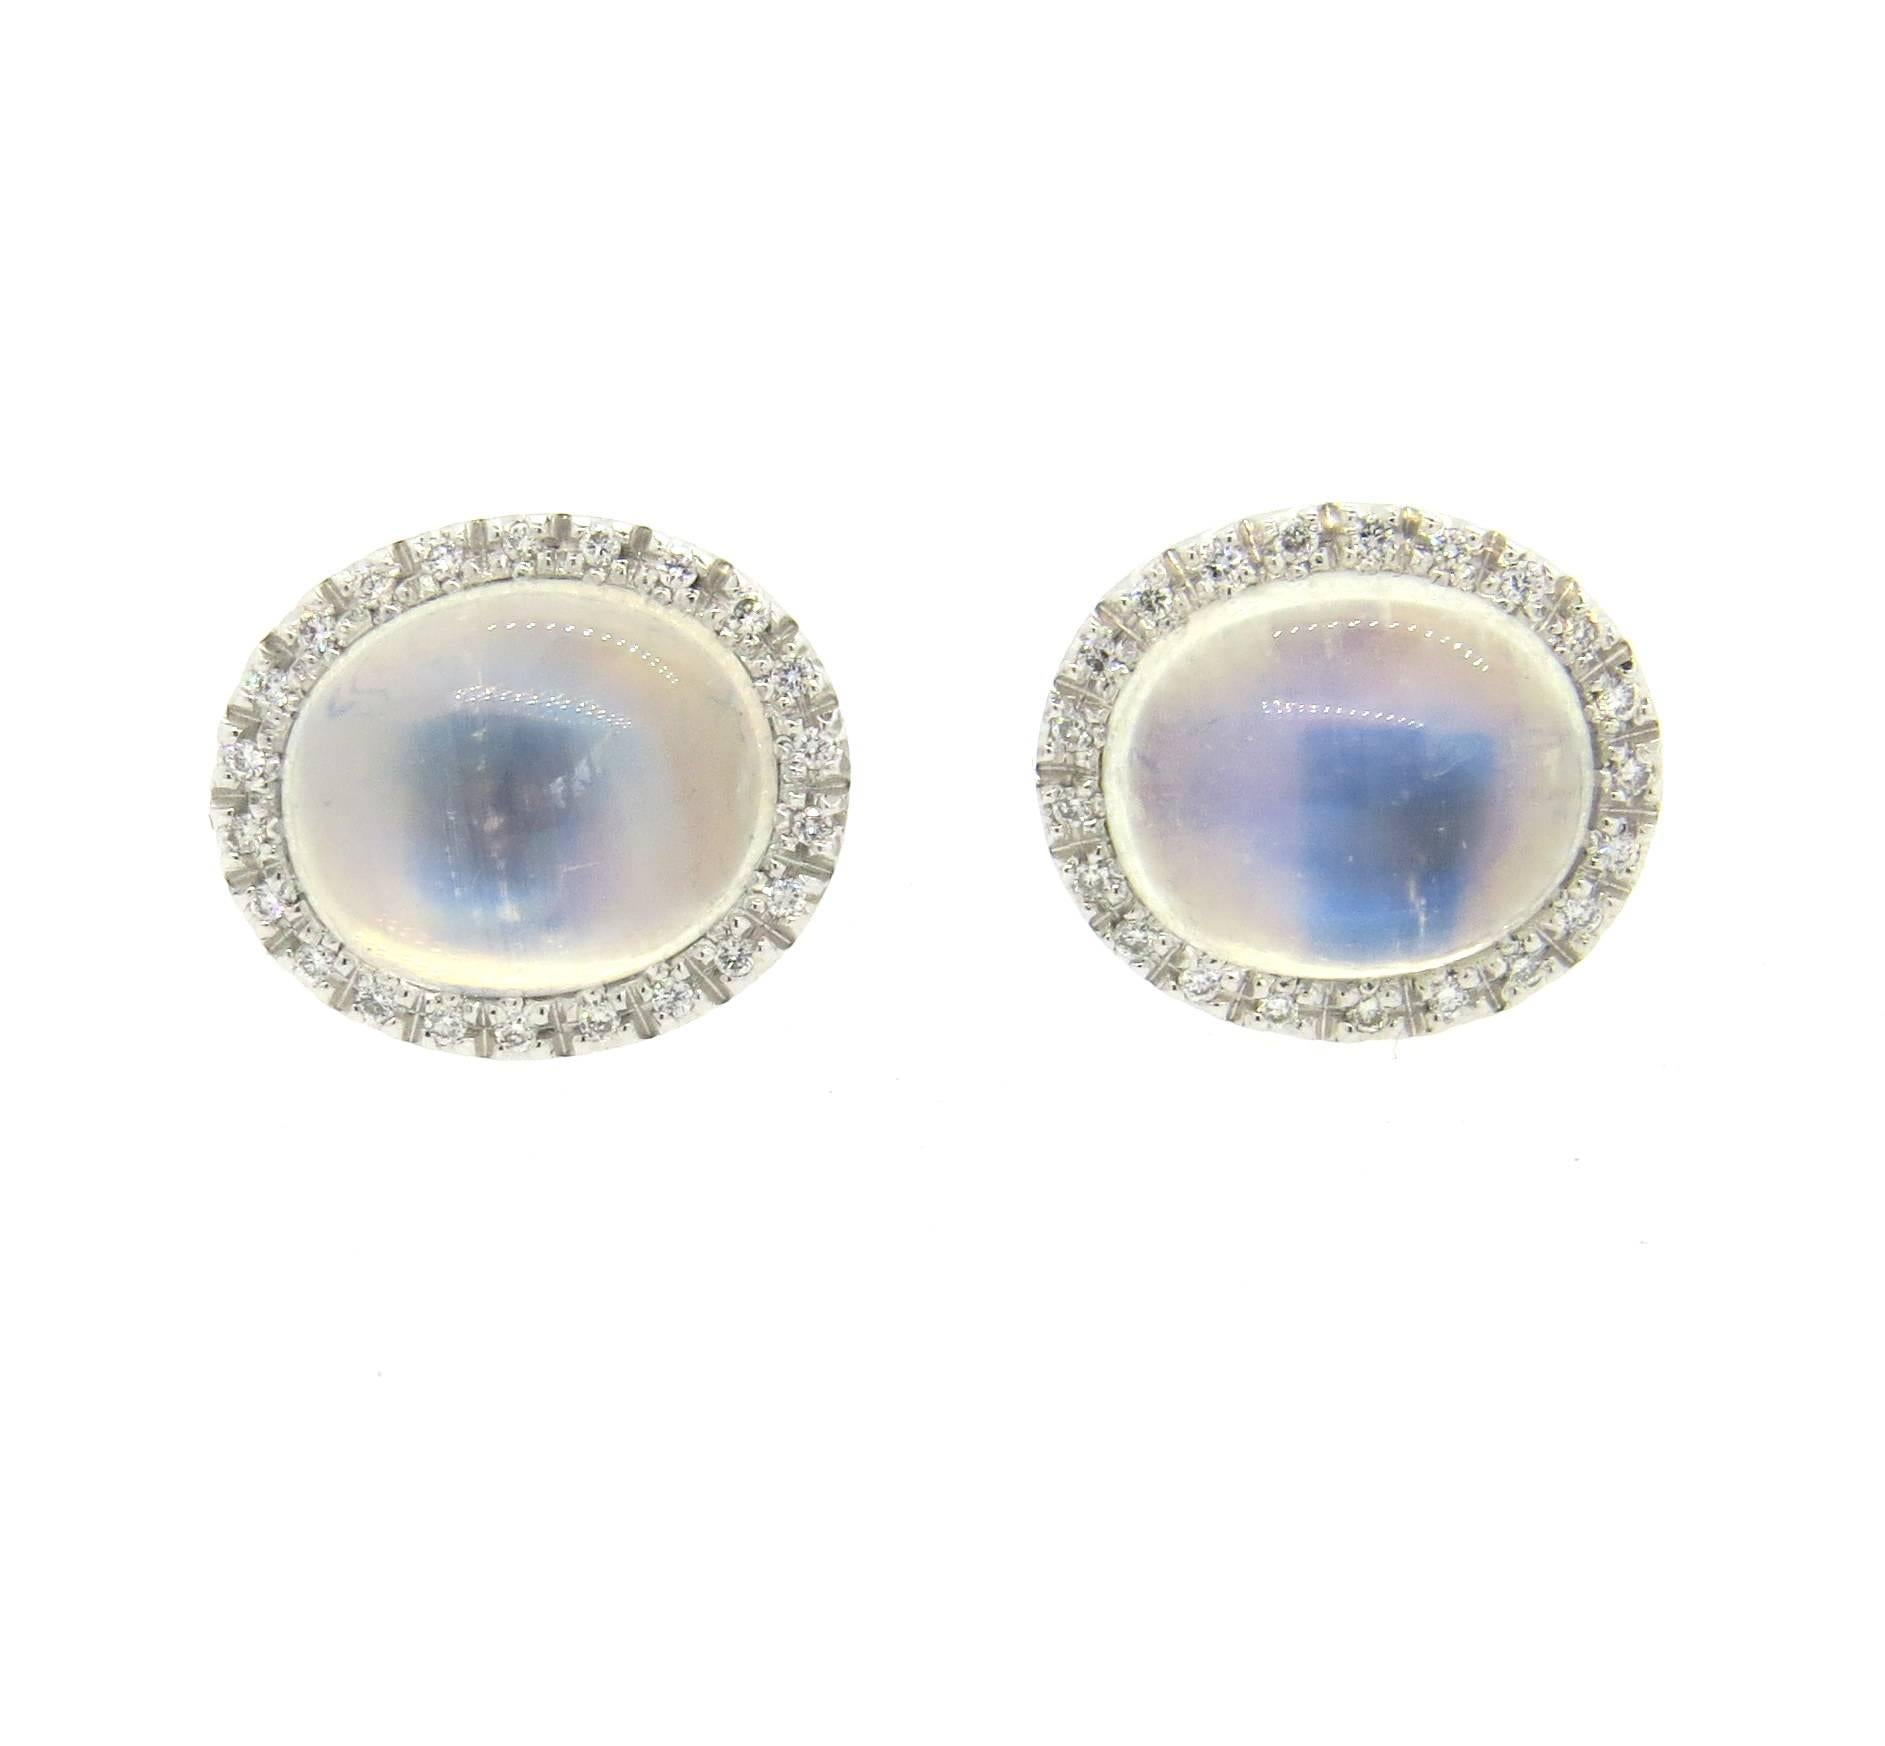 Pair of Favero 18k white gold cufflinks, featuring moonstone cabochons, surrounded with 0.21ctw G/VS diamonds. Each top measures 16mm x 13mm. Marked with maker's mark and 750. Weight - 15 grams
